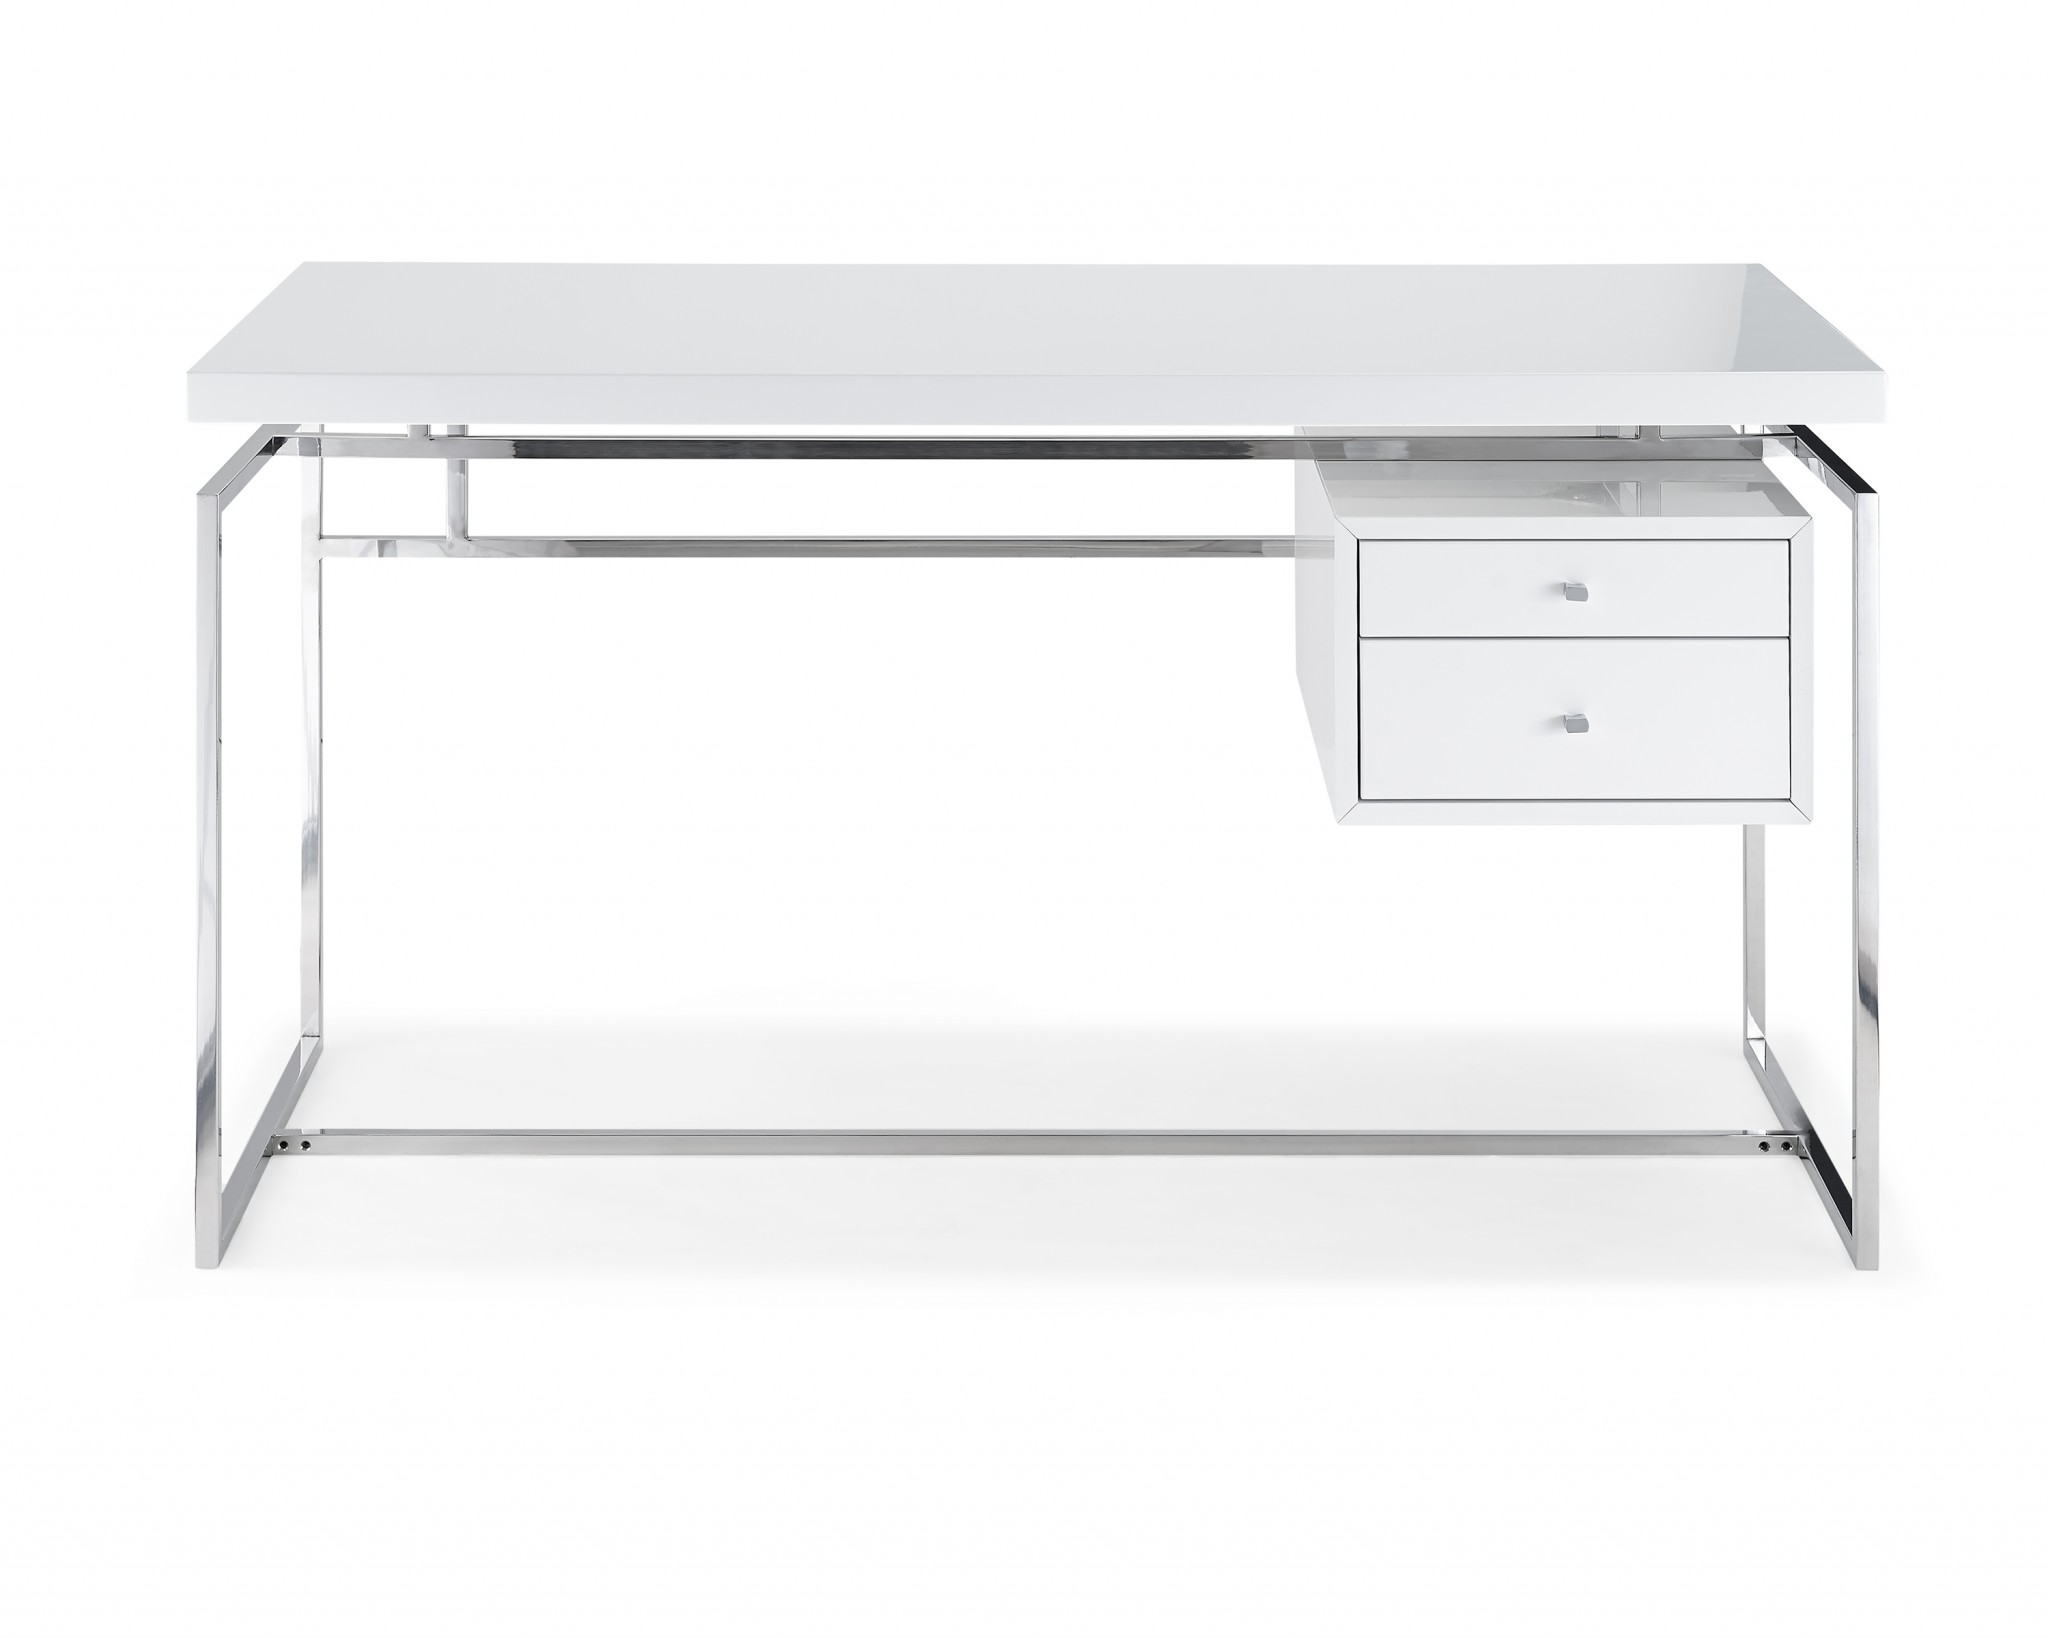 Desk Top & Drawer In High Gloss White With Stainless Steel Base